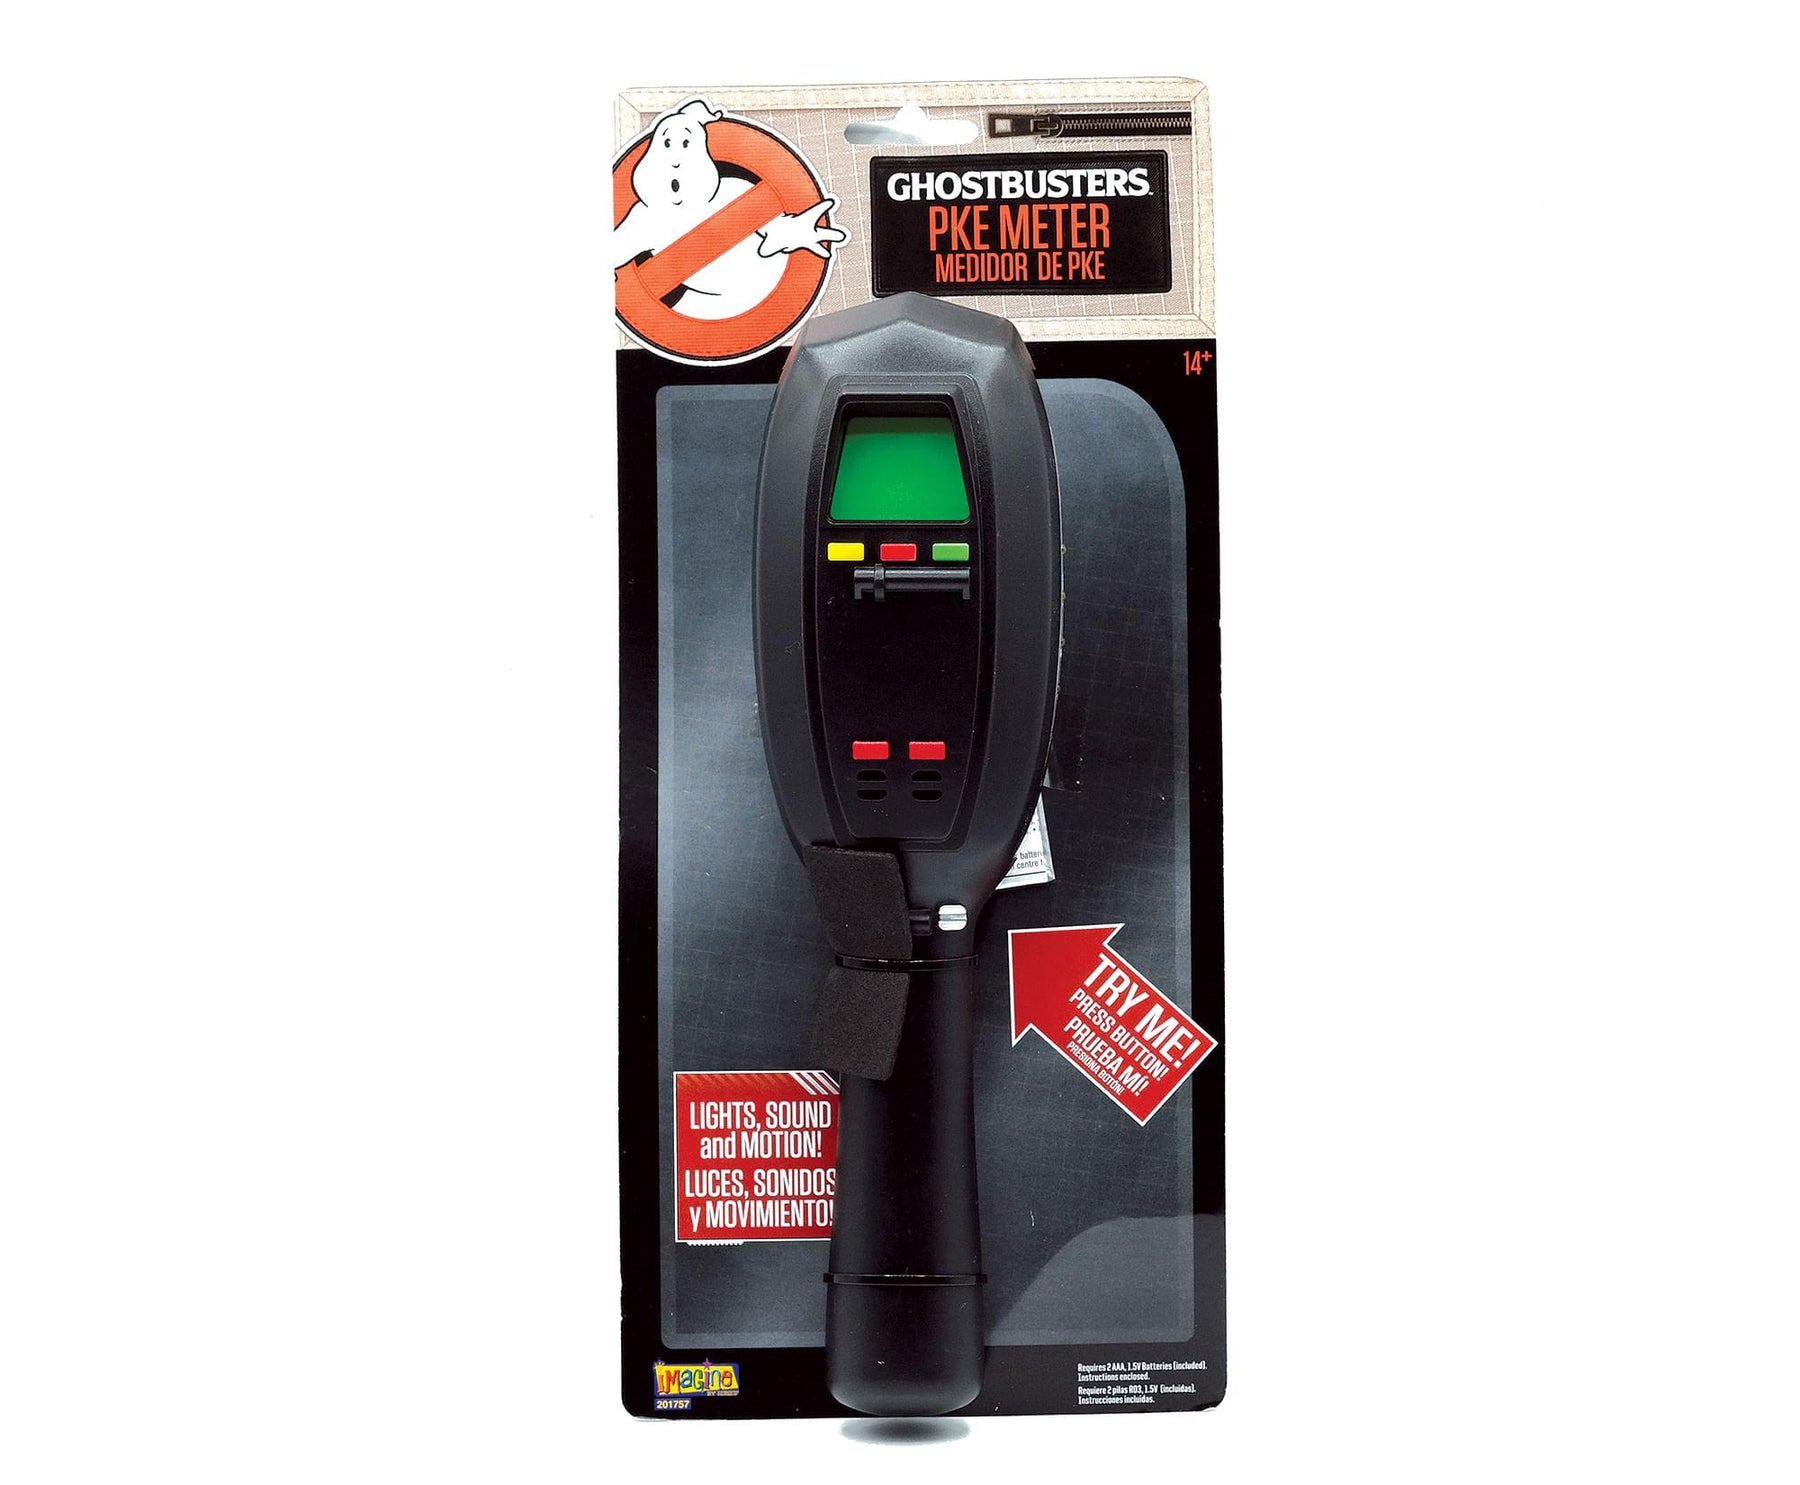 Ghostbusters Light-Up PKE Meter Costume Accessory